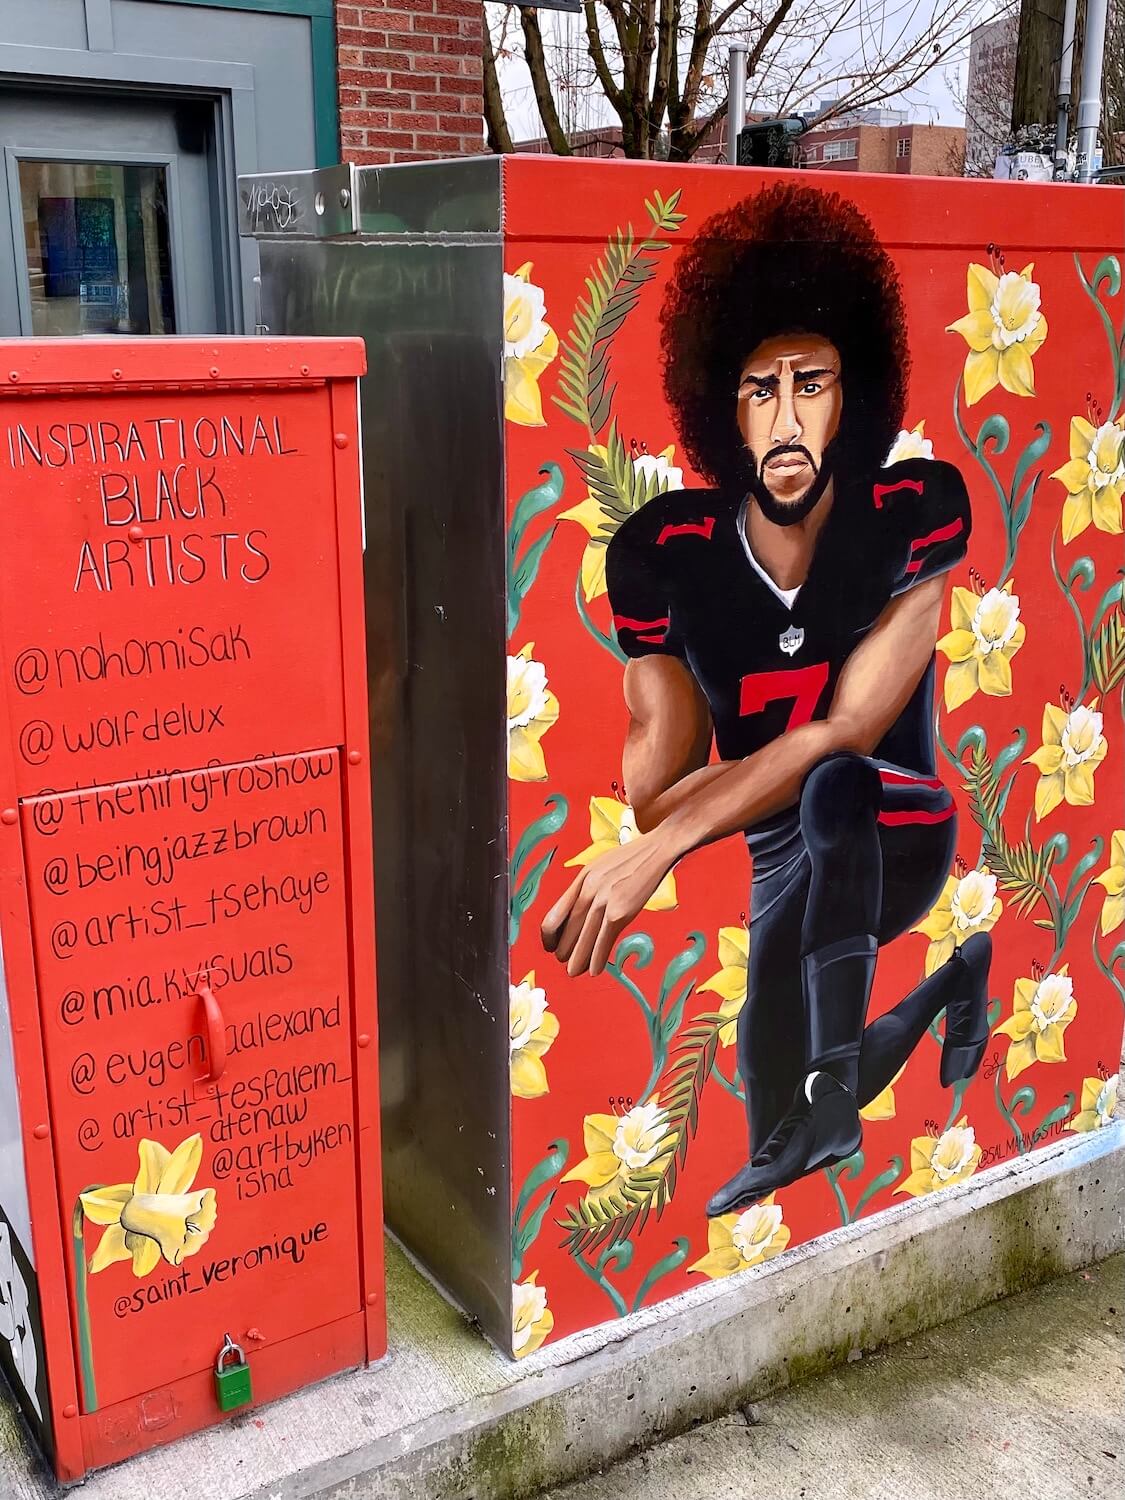 This mural on an electrical panel on Capitol Hill in Seattle depicts Colin Kaepernick kneeling in his football jersey amongst red flowers with yellow daffodils. There is another panel painted red with a list of Inspirational Black Artists.